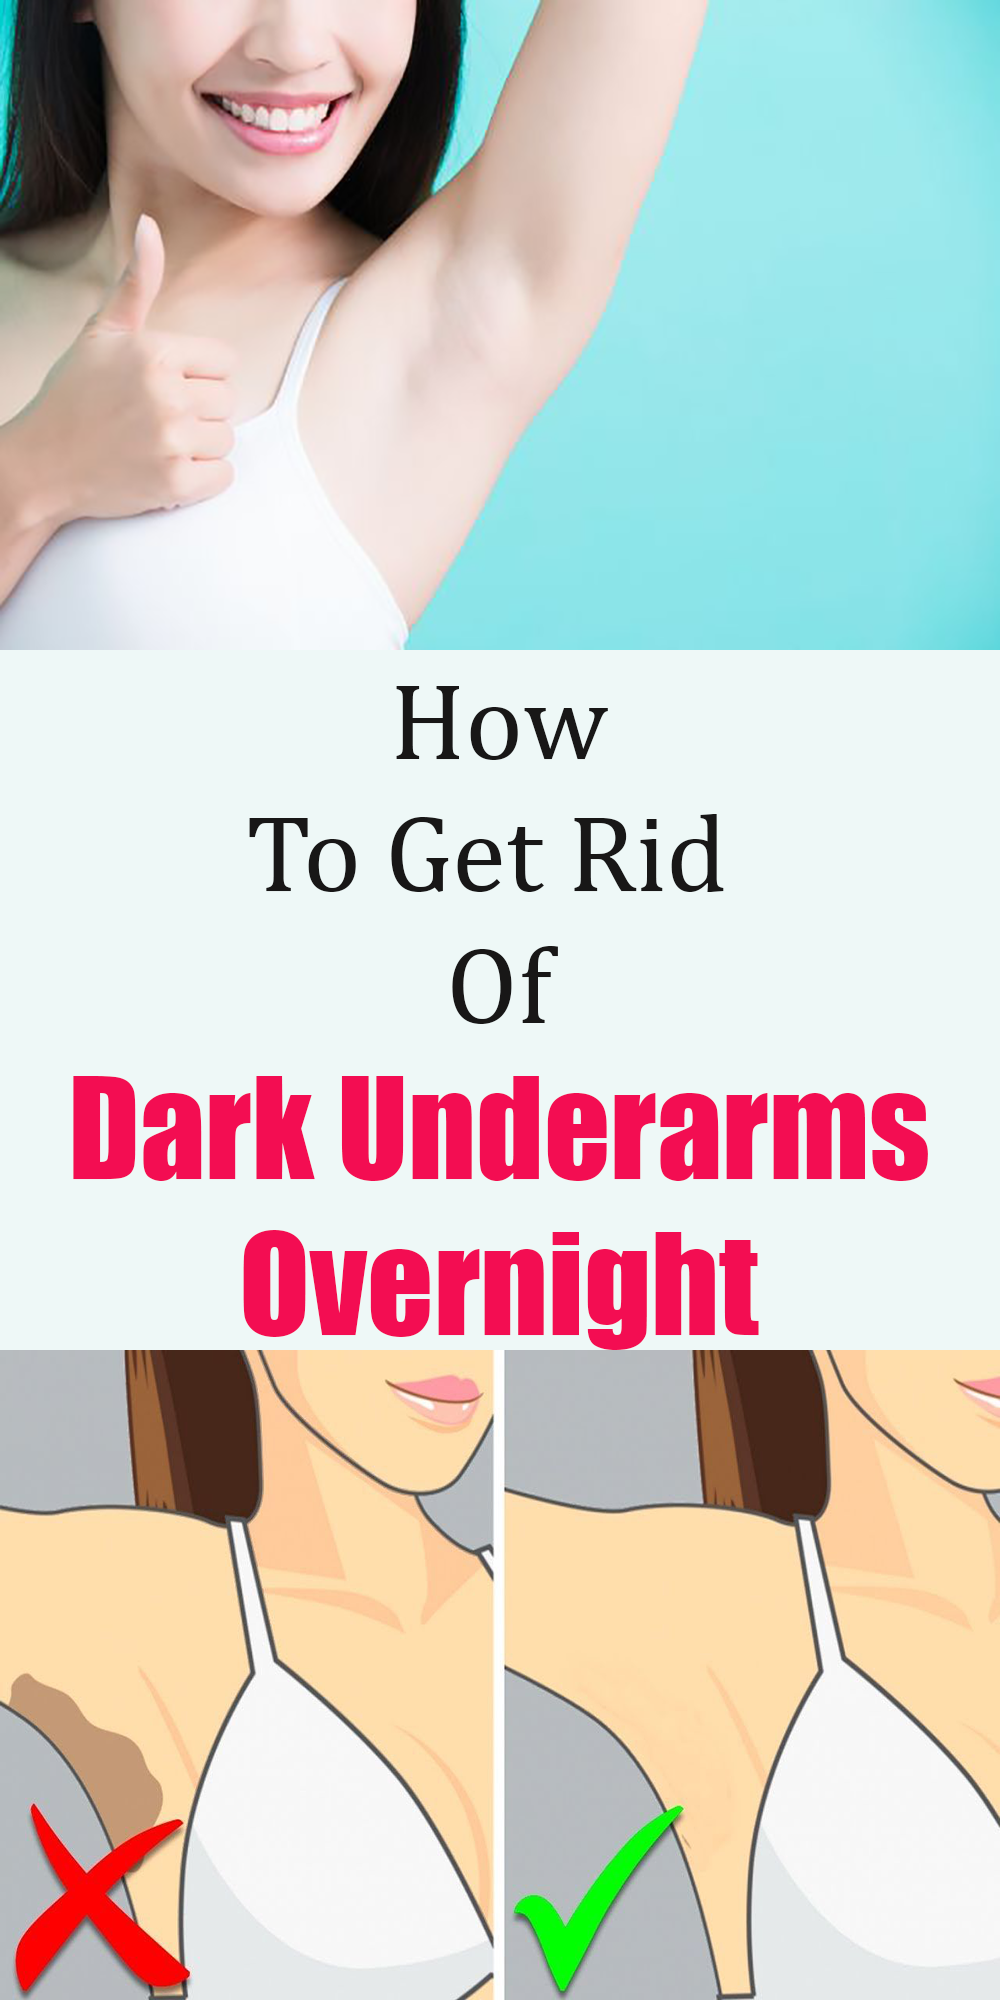 How to get rid of Dark underarms overnight -   15 how to get rid of dark underarms ideas